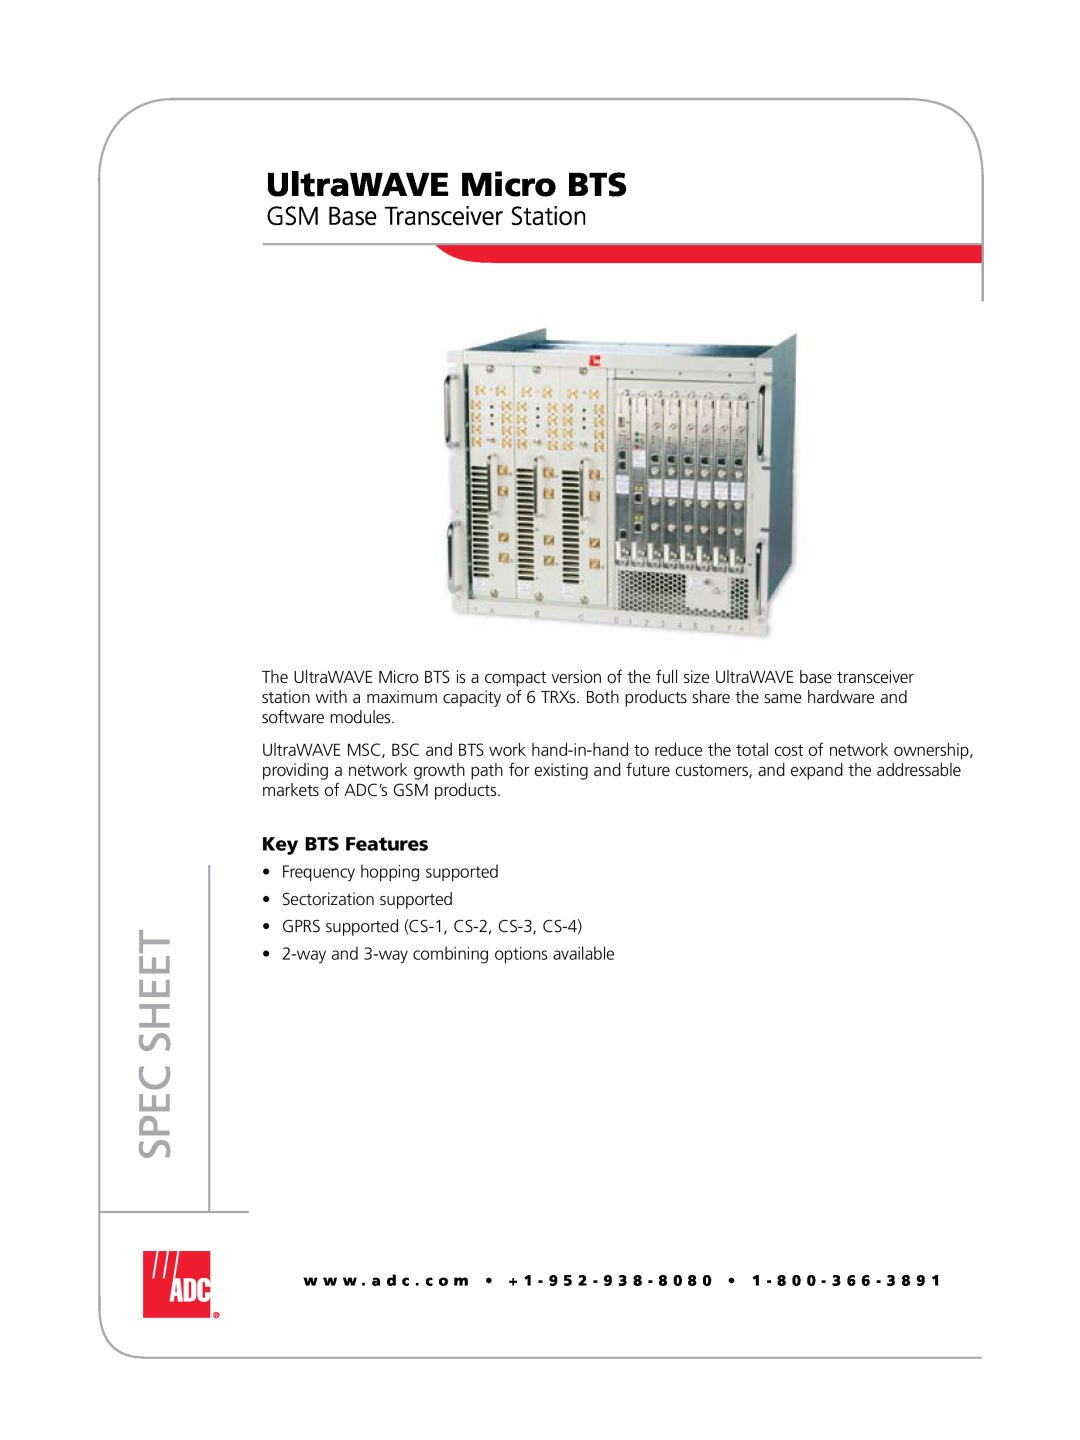 ADC manual UltraWAVE Micro BTS, GSM Base Transceiver Station, Spec Sheet, Key BTS Features 